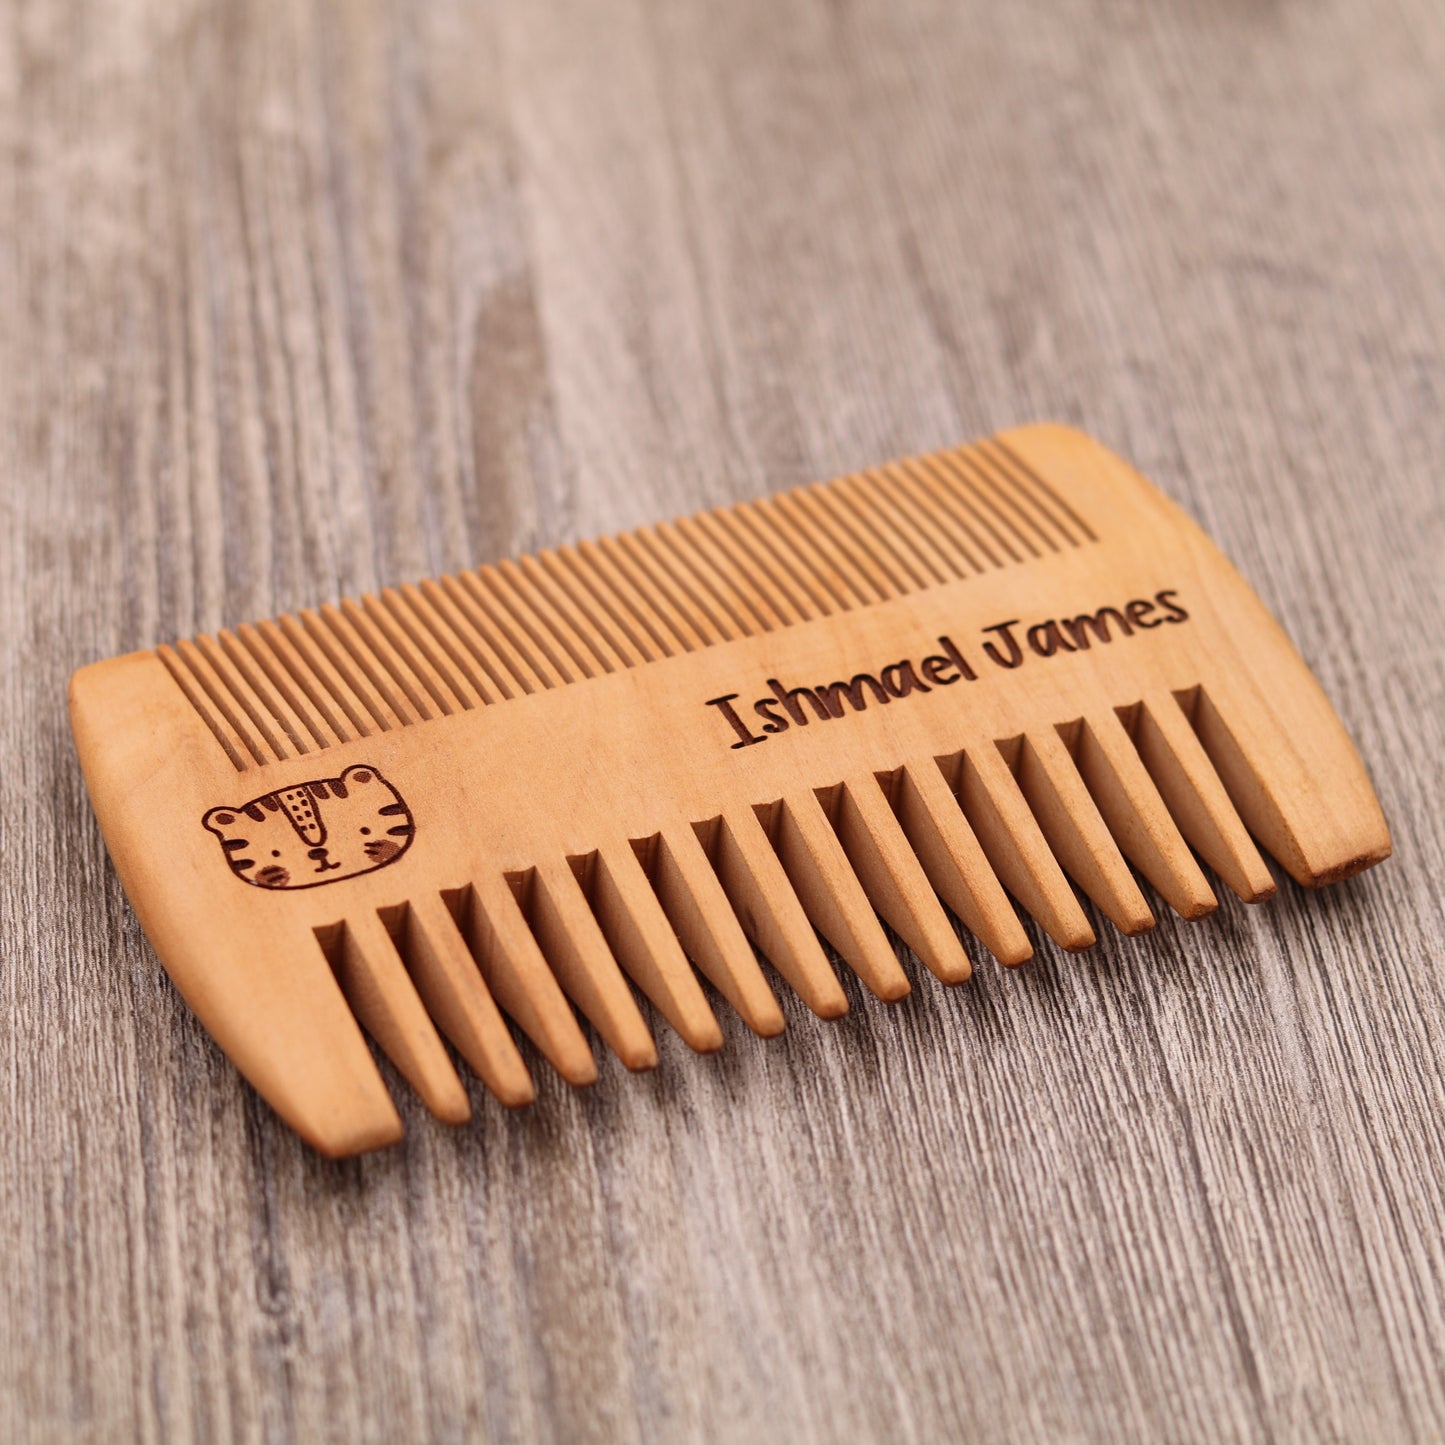 Wood Baby Combs - Personalized